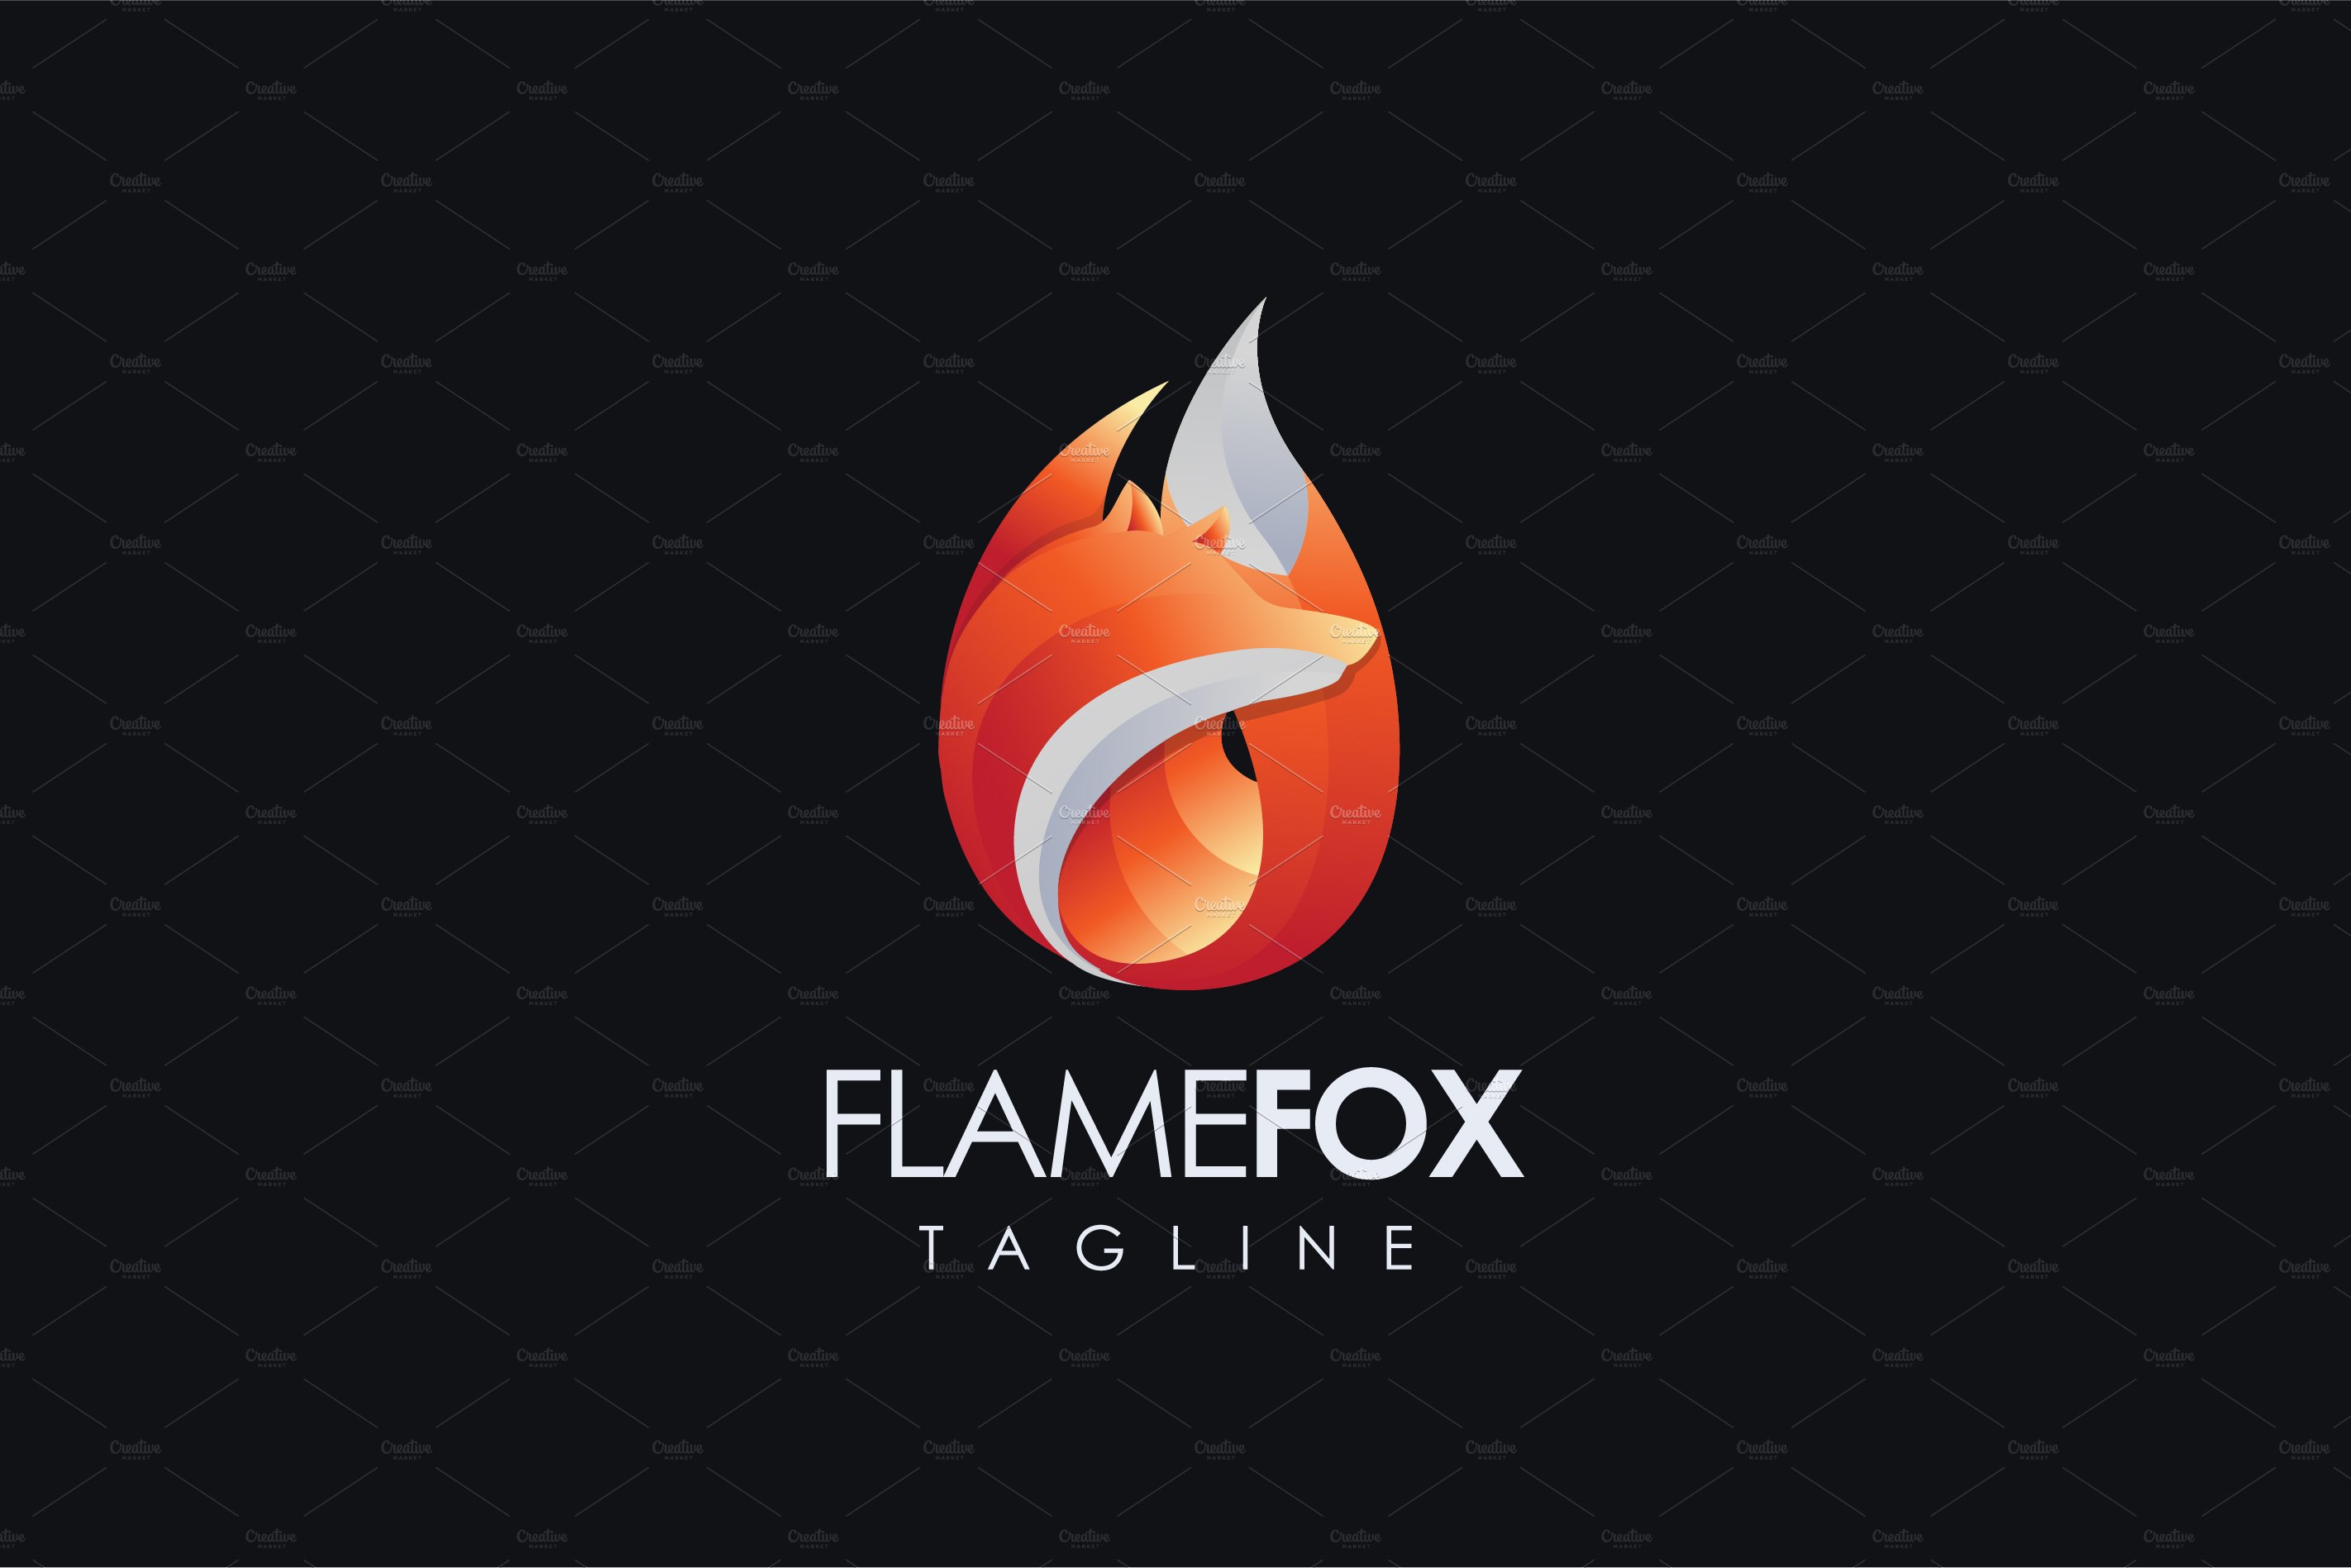 Modern Flame Fire Red Fox logo cover image.